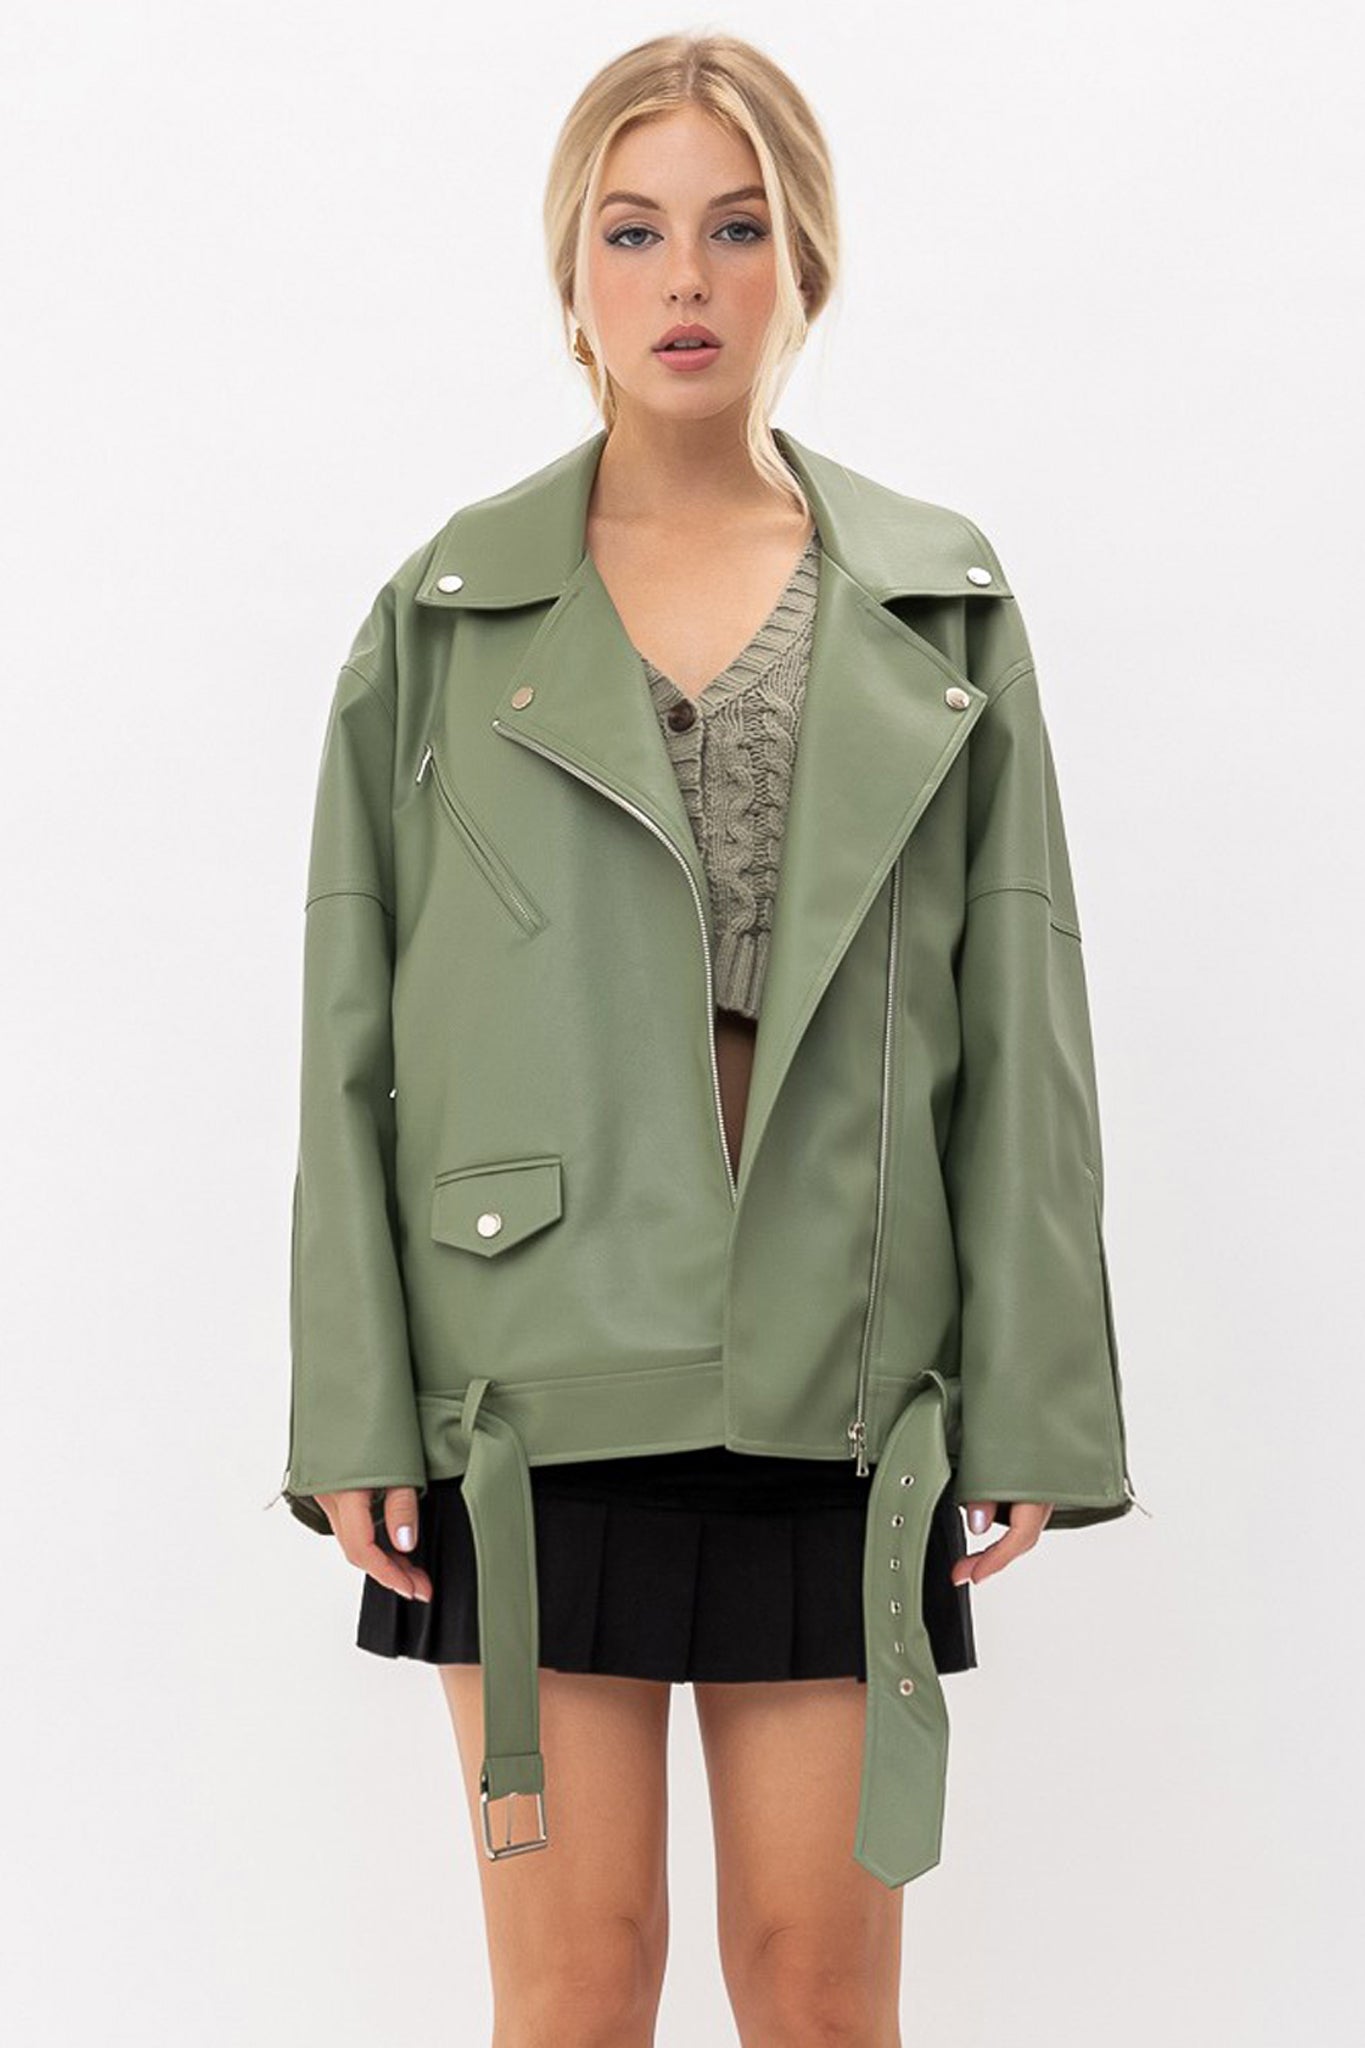 View 4 of Mozo Oversized Biker Jacket in Light Olive, a Jackets from Larrea Cove. Detail: .